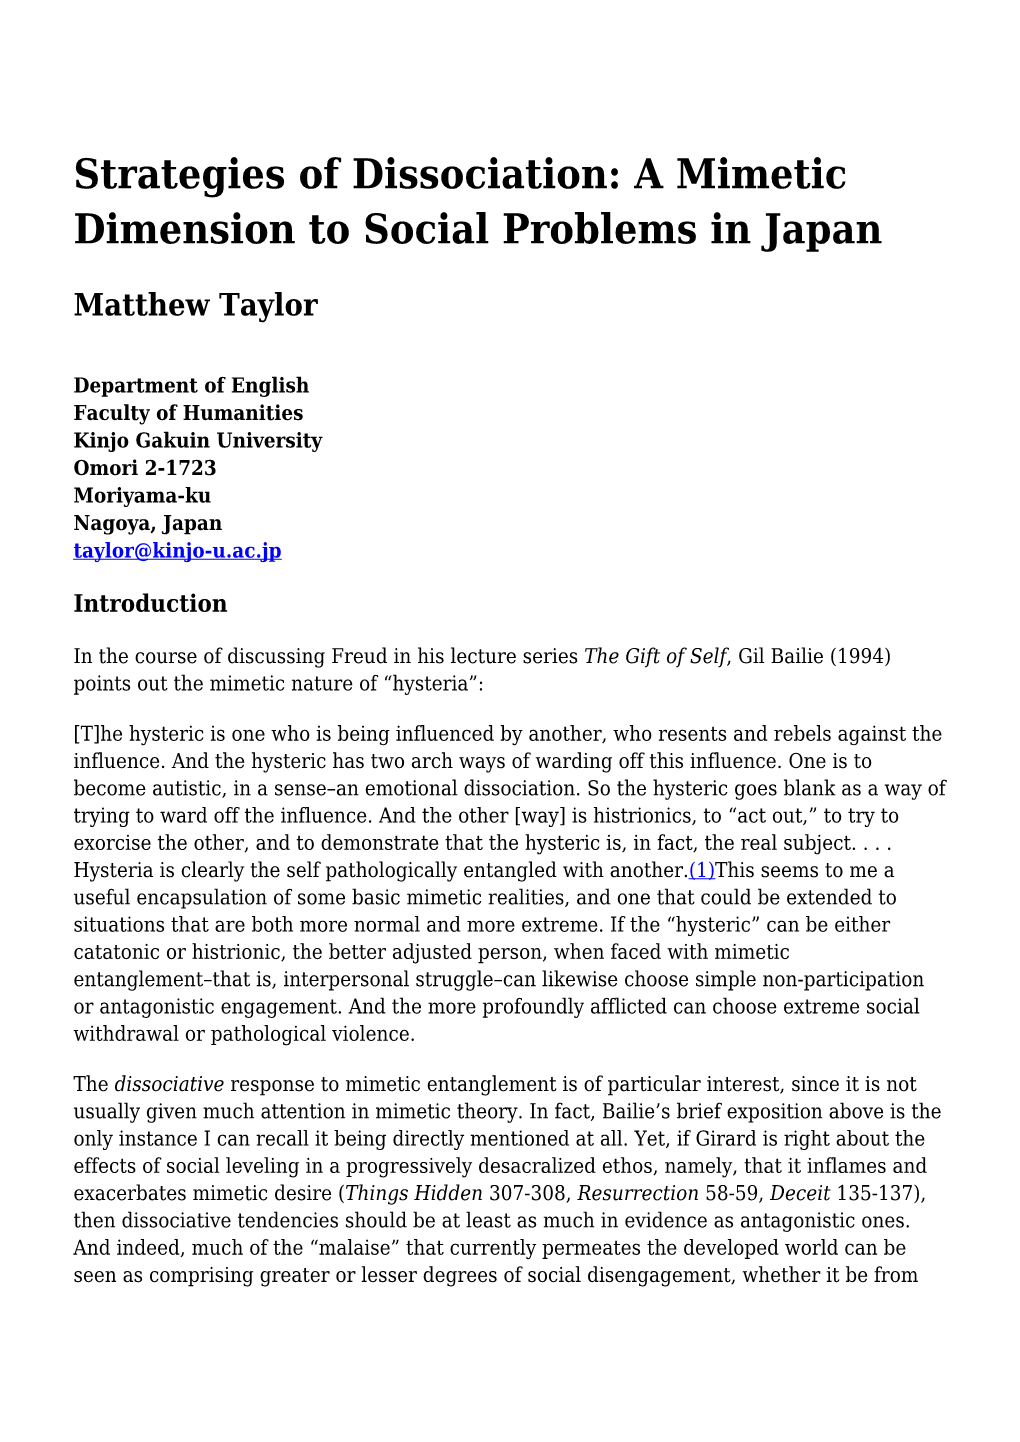 Strategies of Dissociation: a Mimetic Dimension to Social Problems in Japan